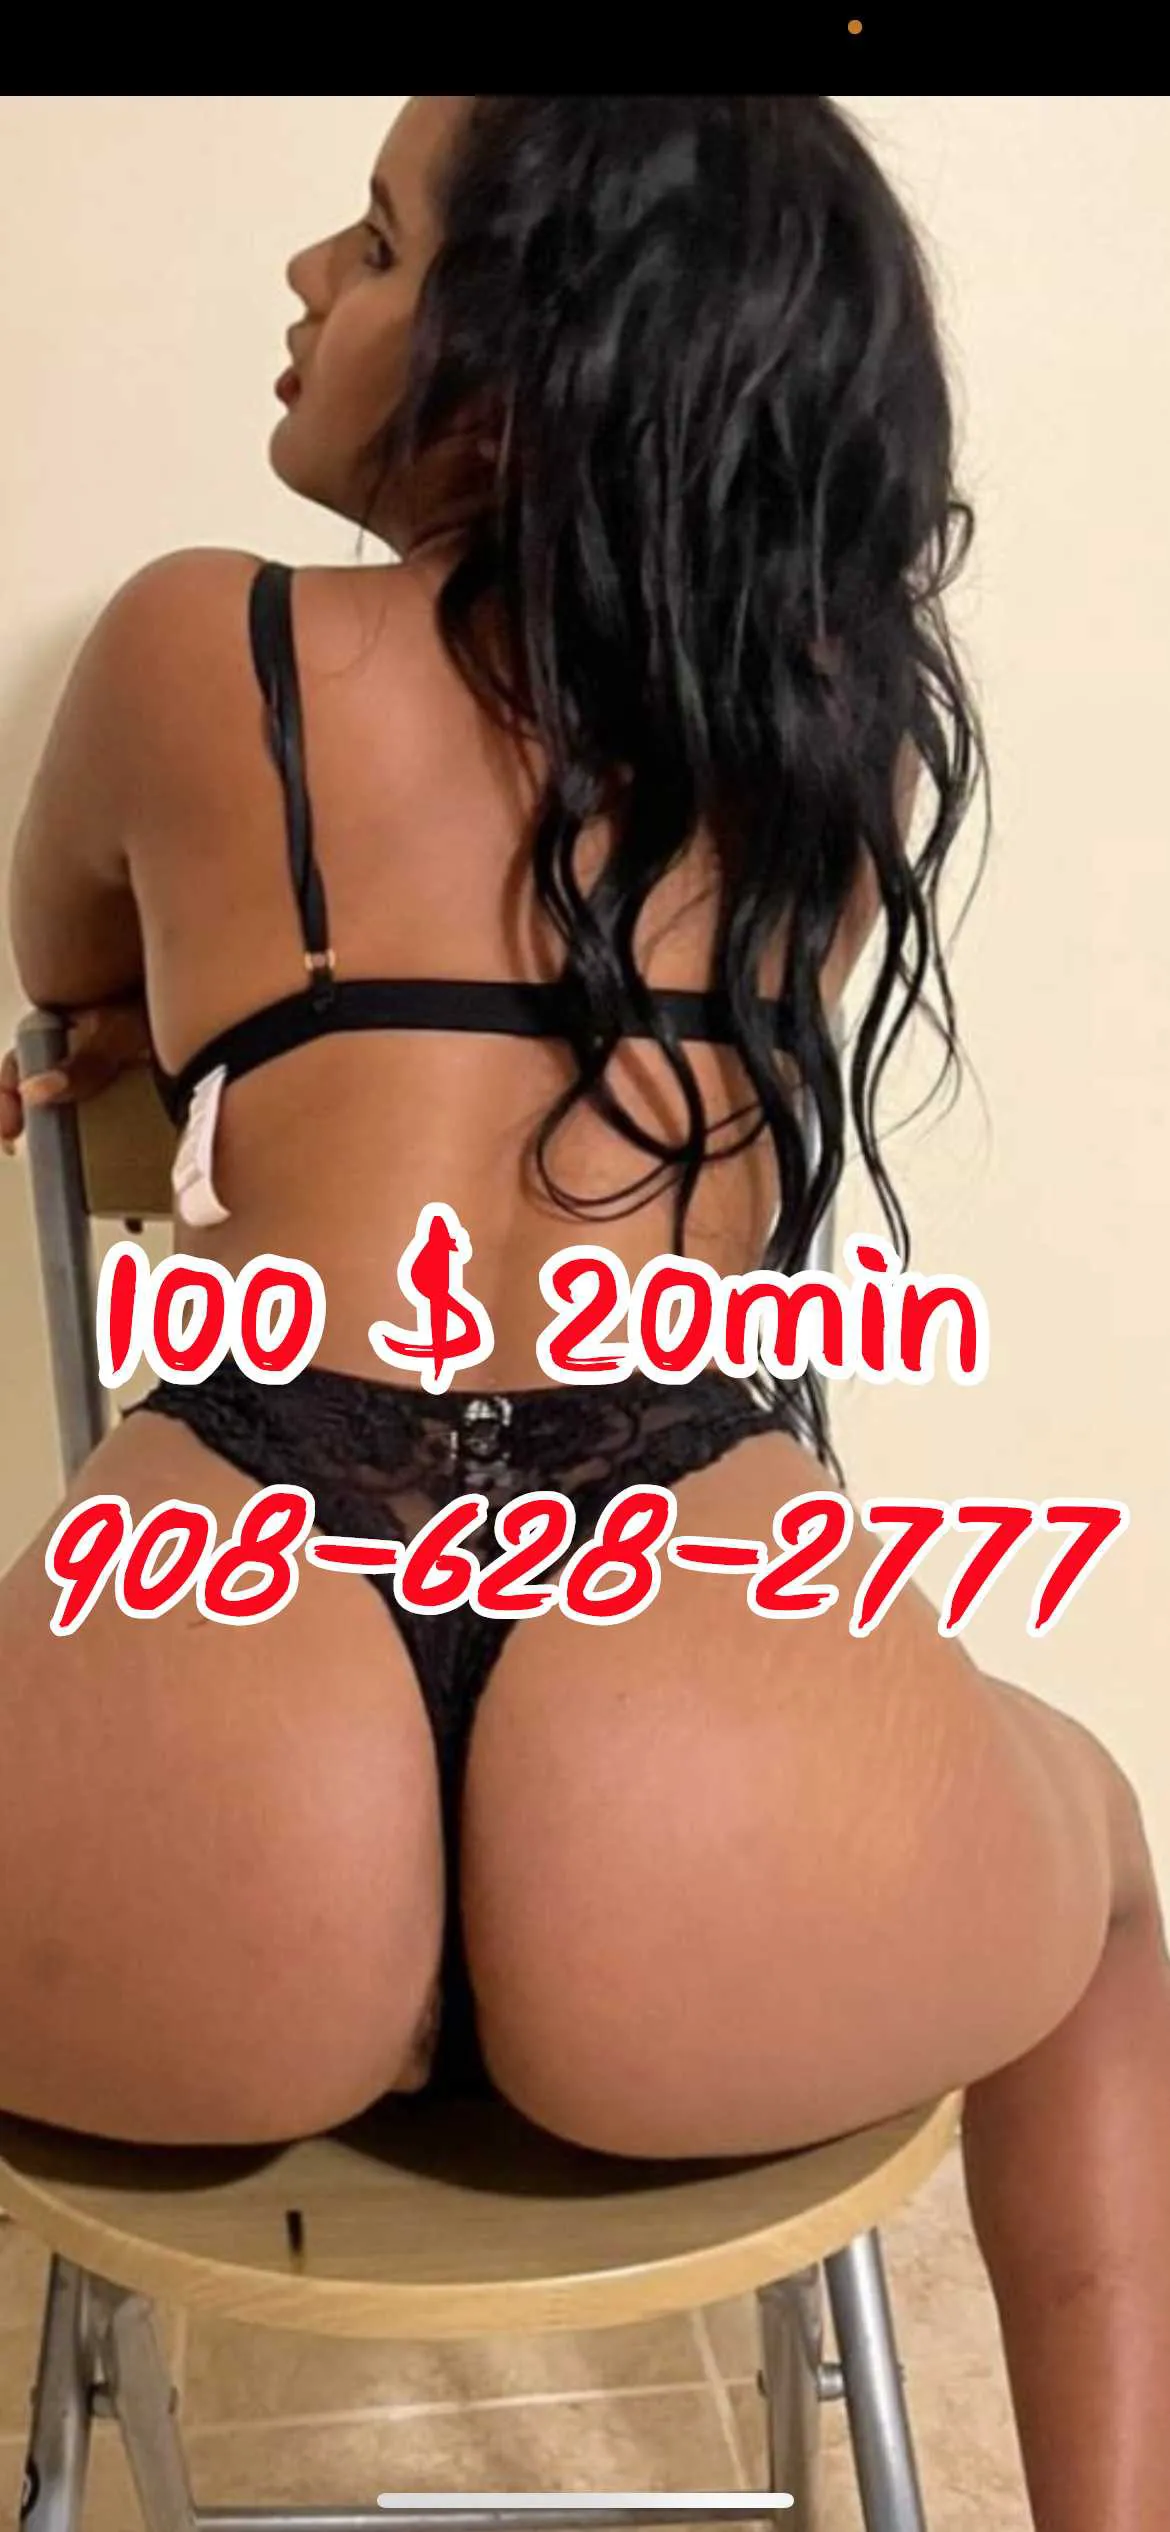 Reviews about escort with phone number 9086282777